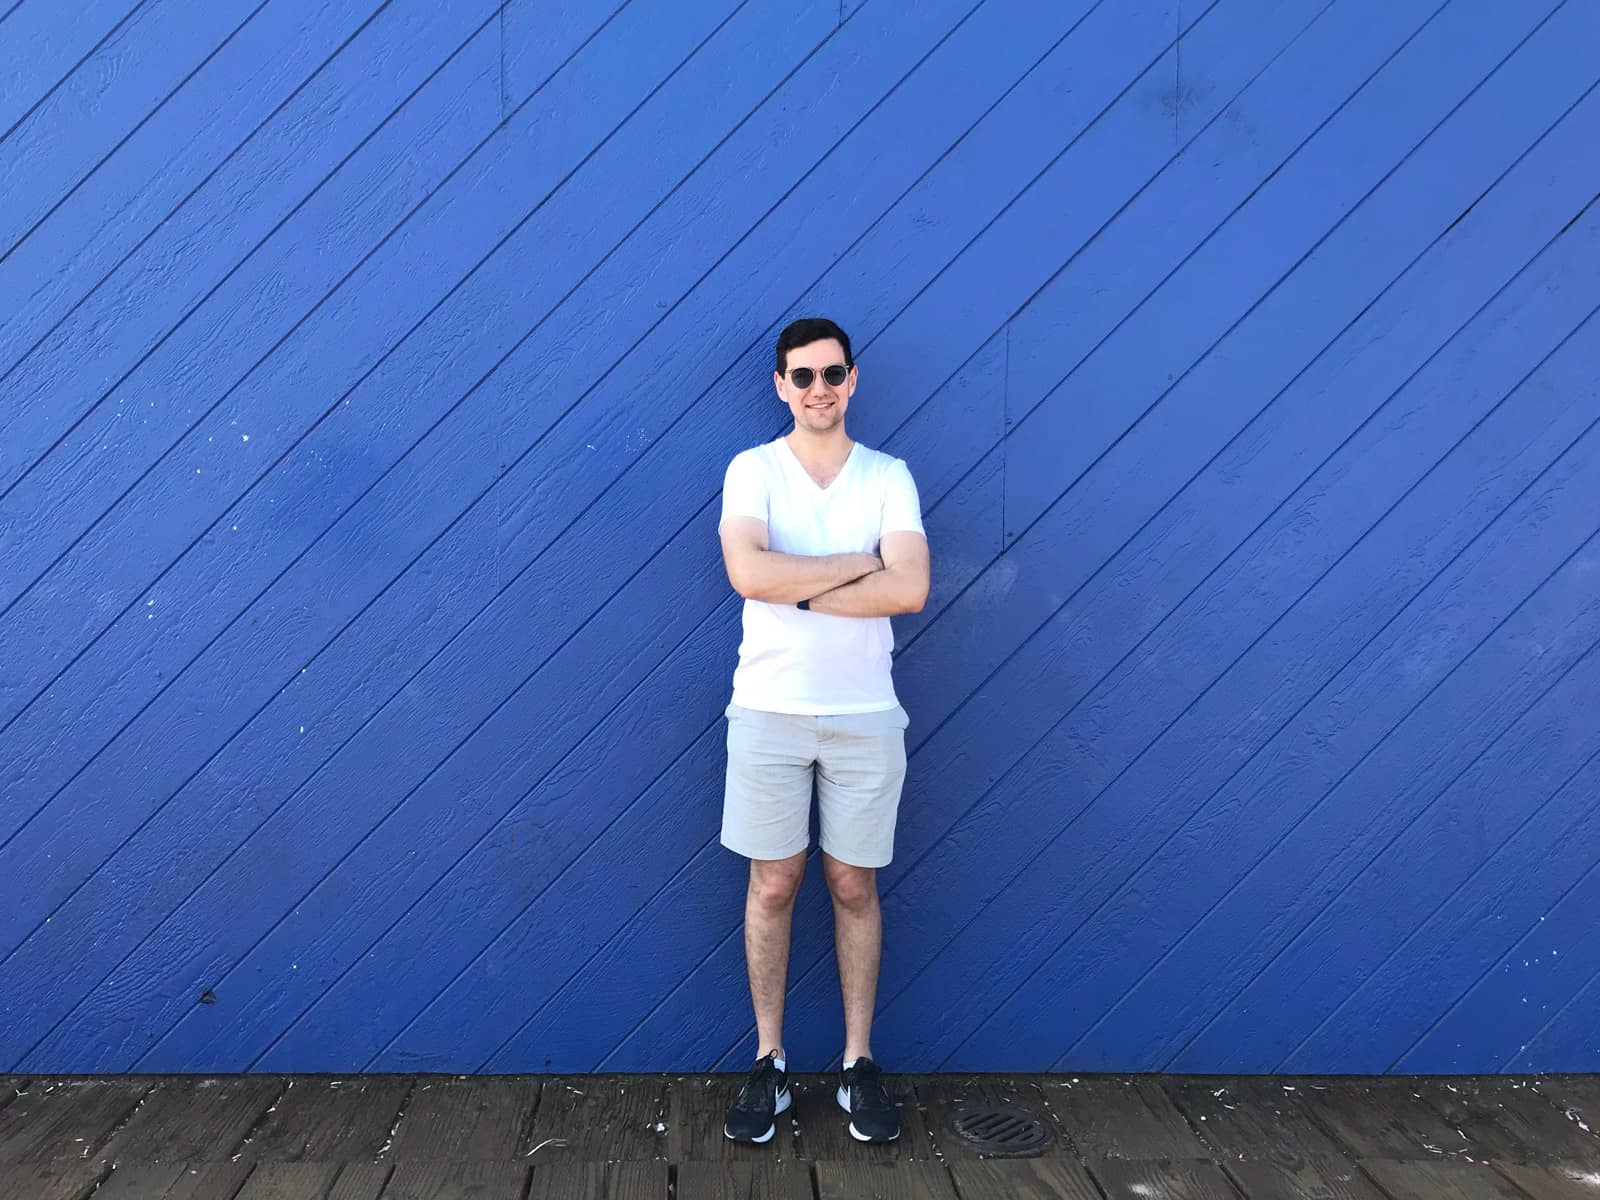 A man in a white shirt and light coloured shorts, with his arms folded, standing against a wooden backdrop painted in royal blue.